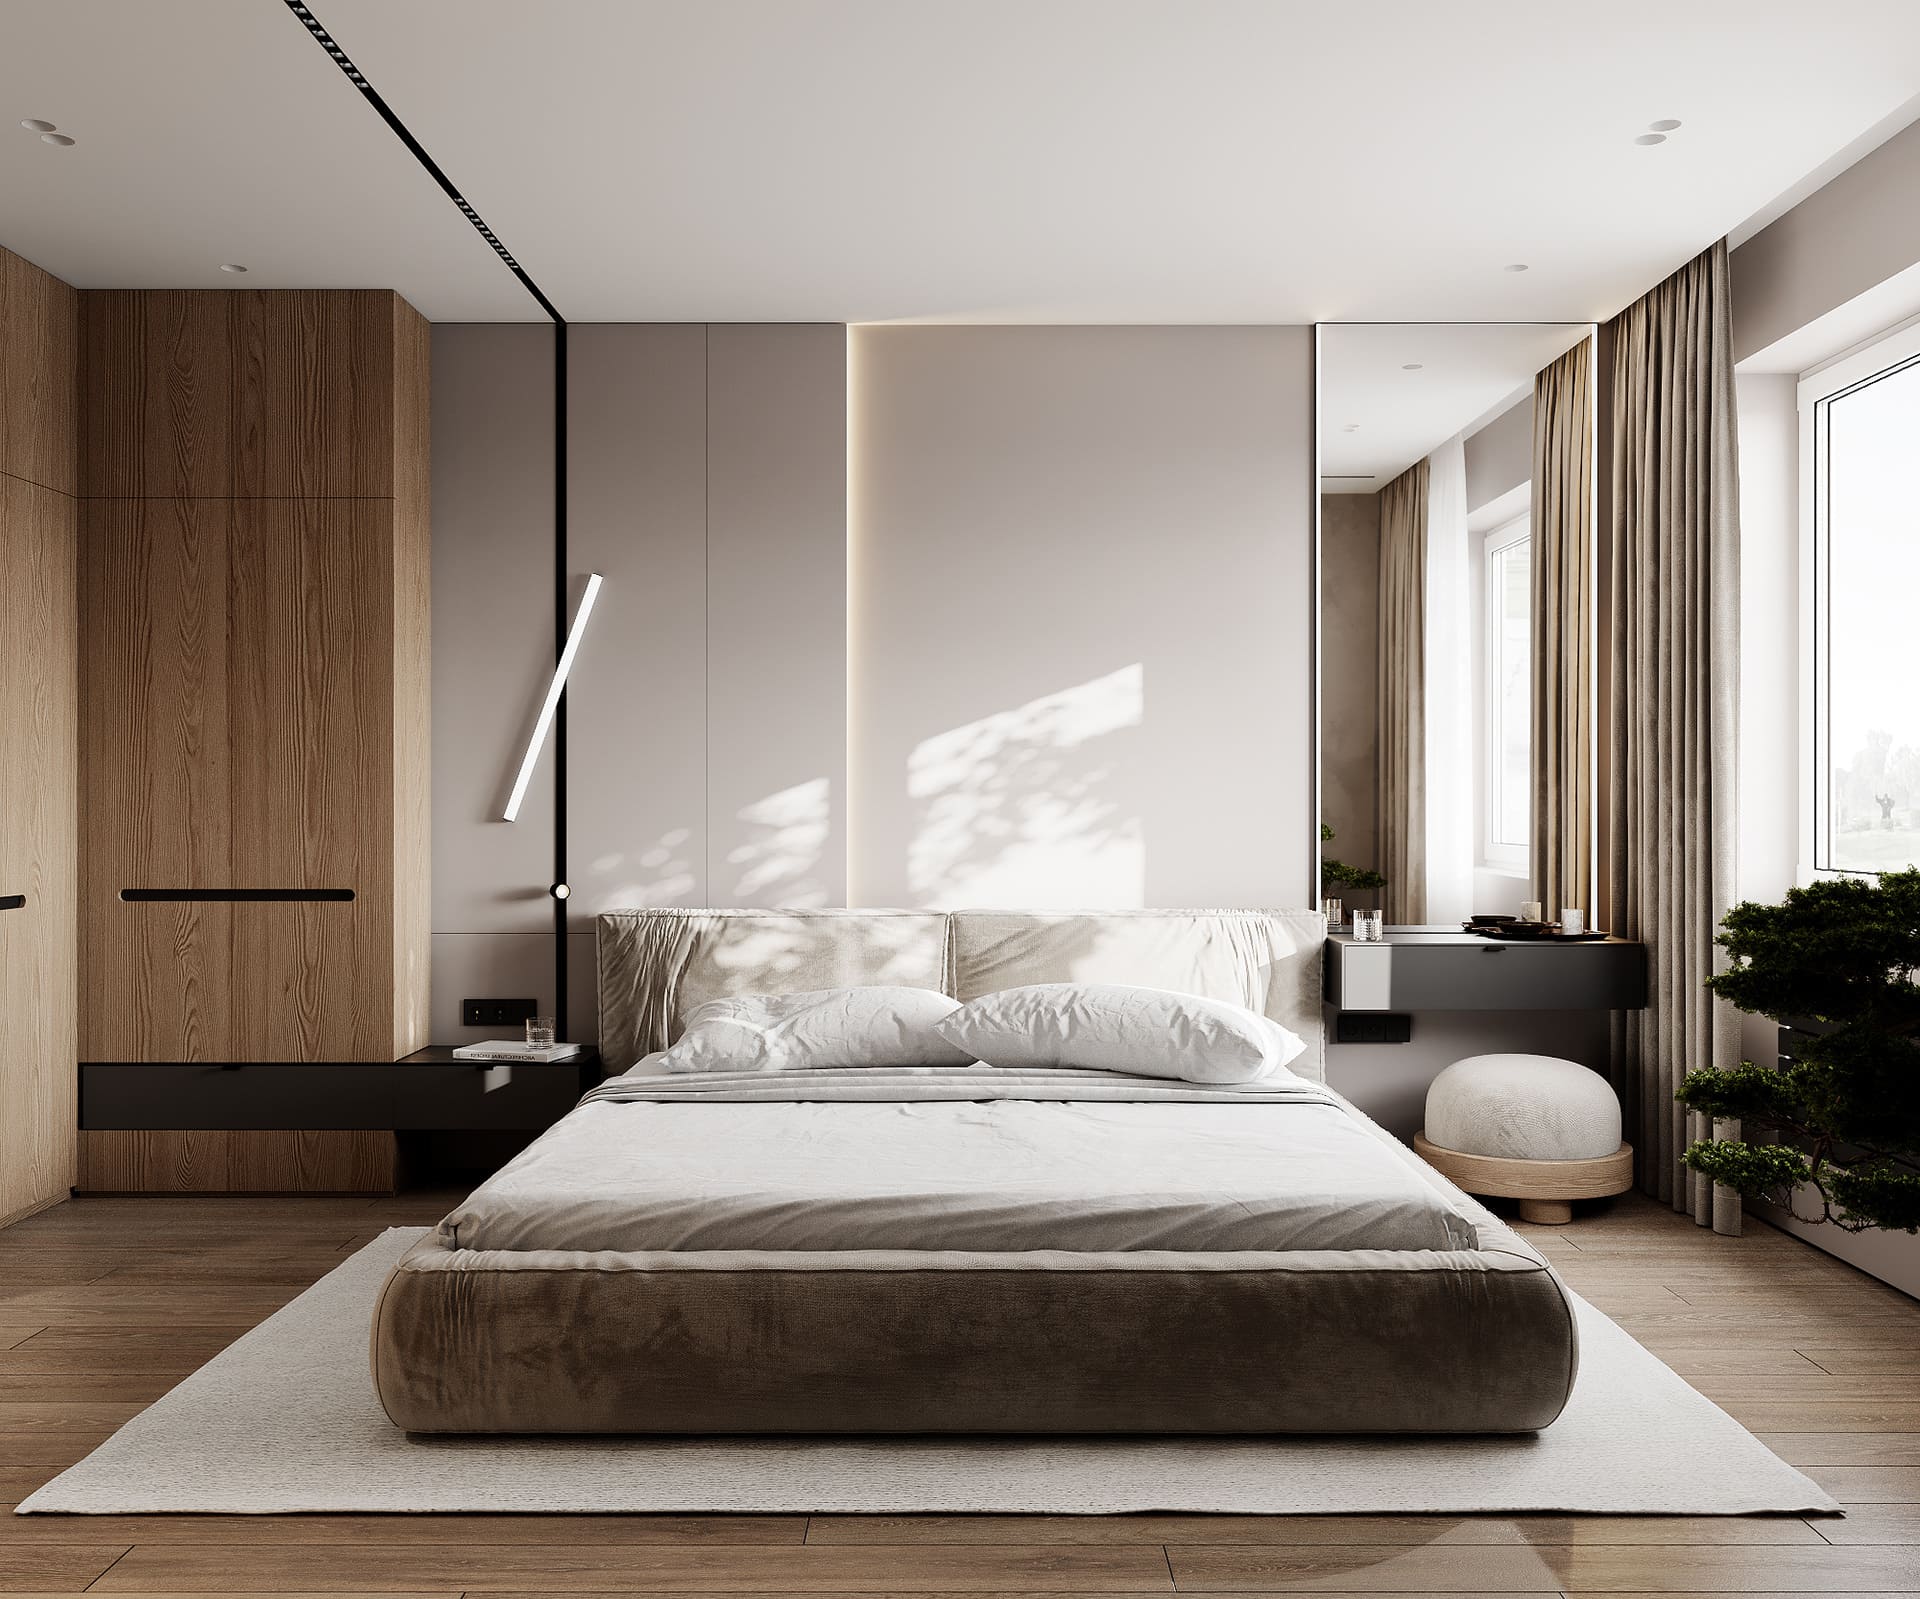 Laconic apartment in the style of minimalism